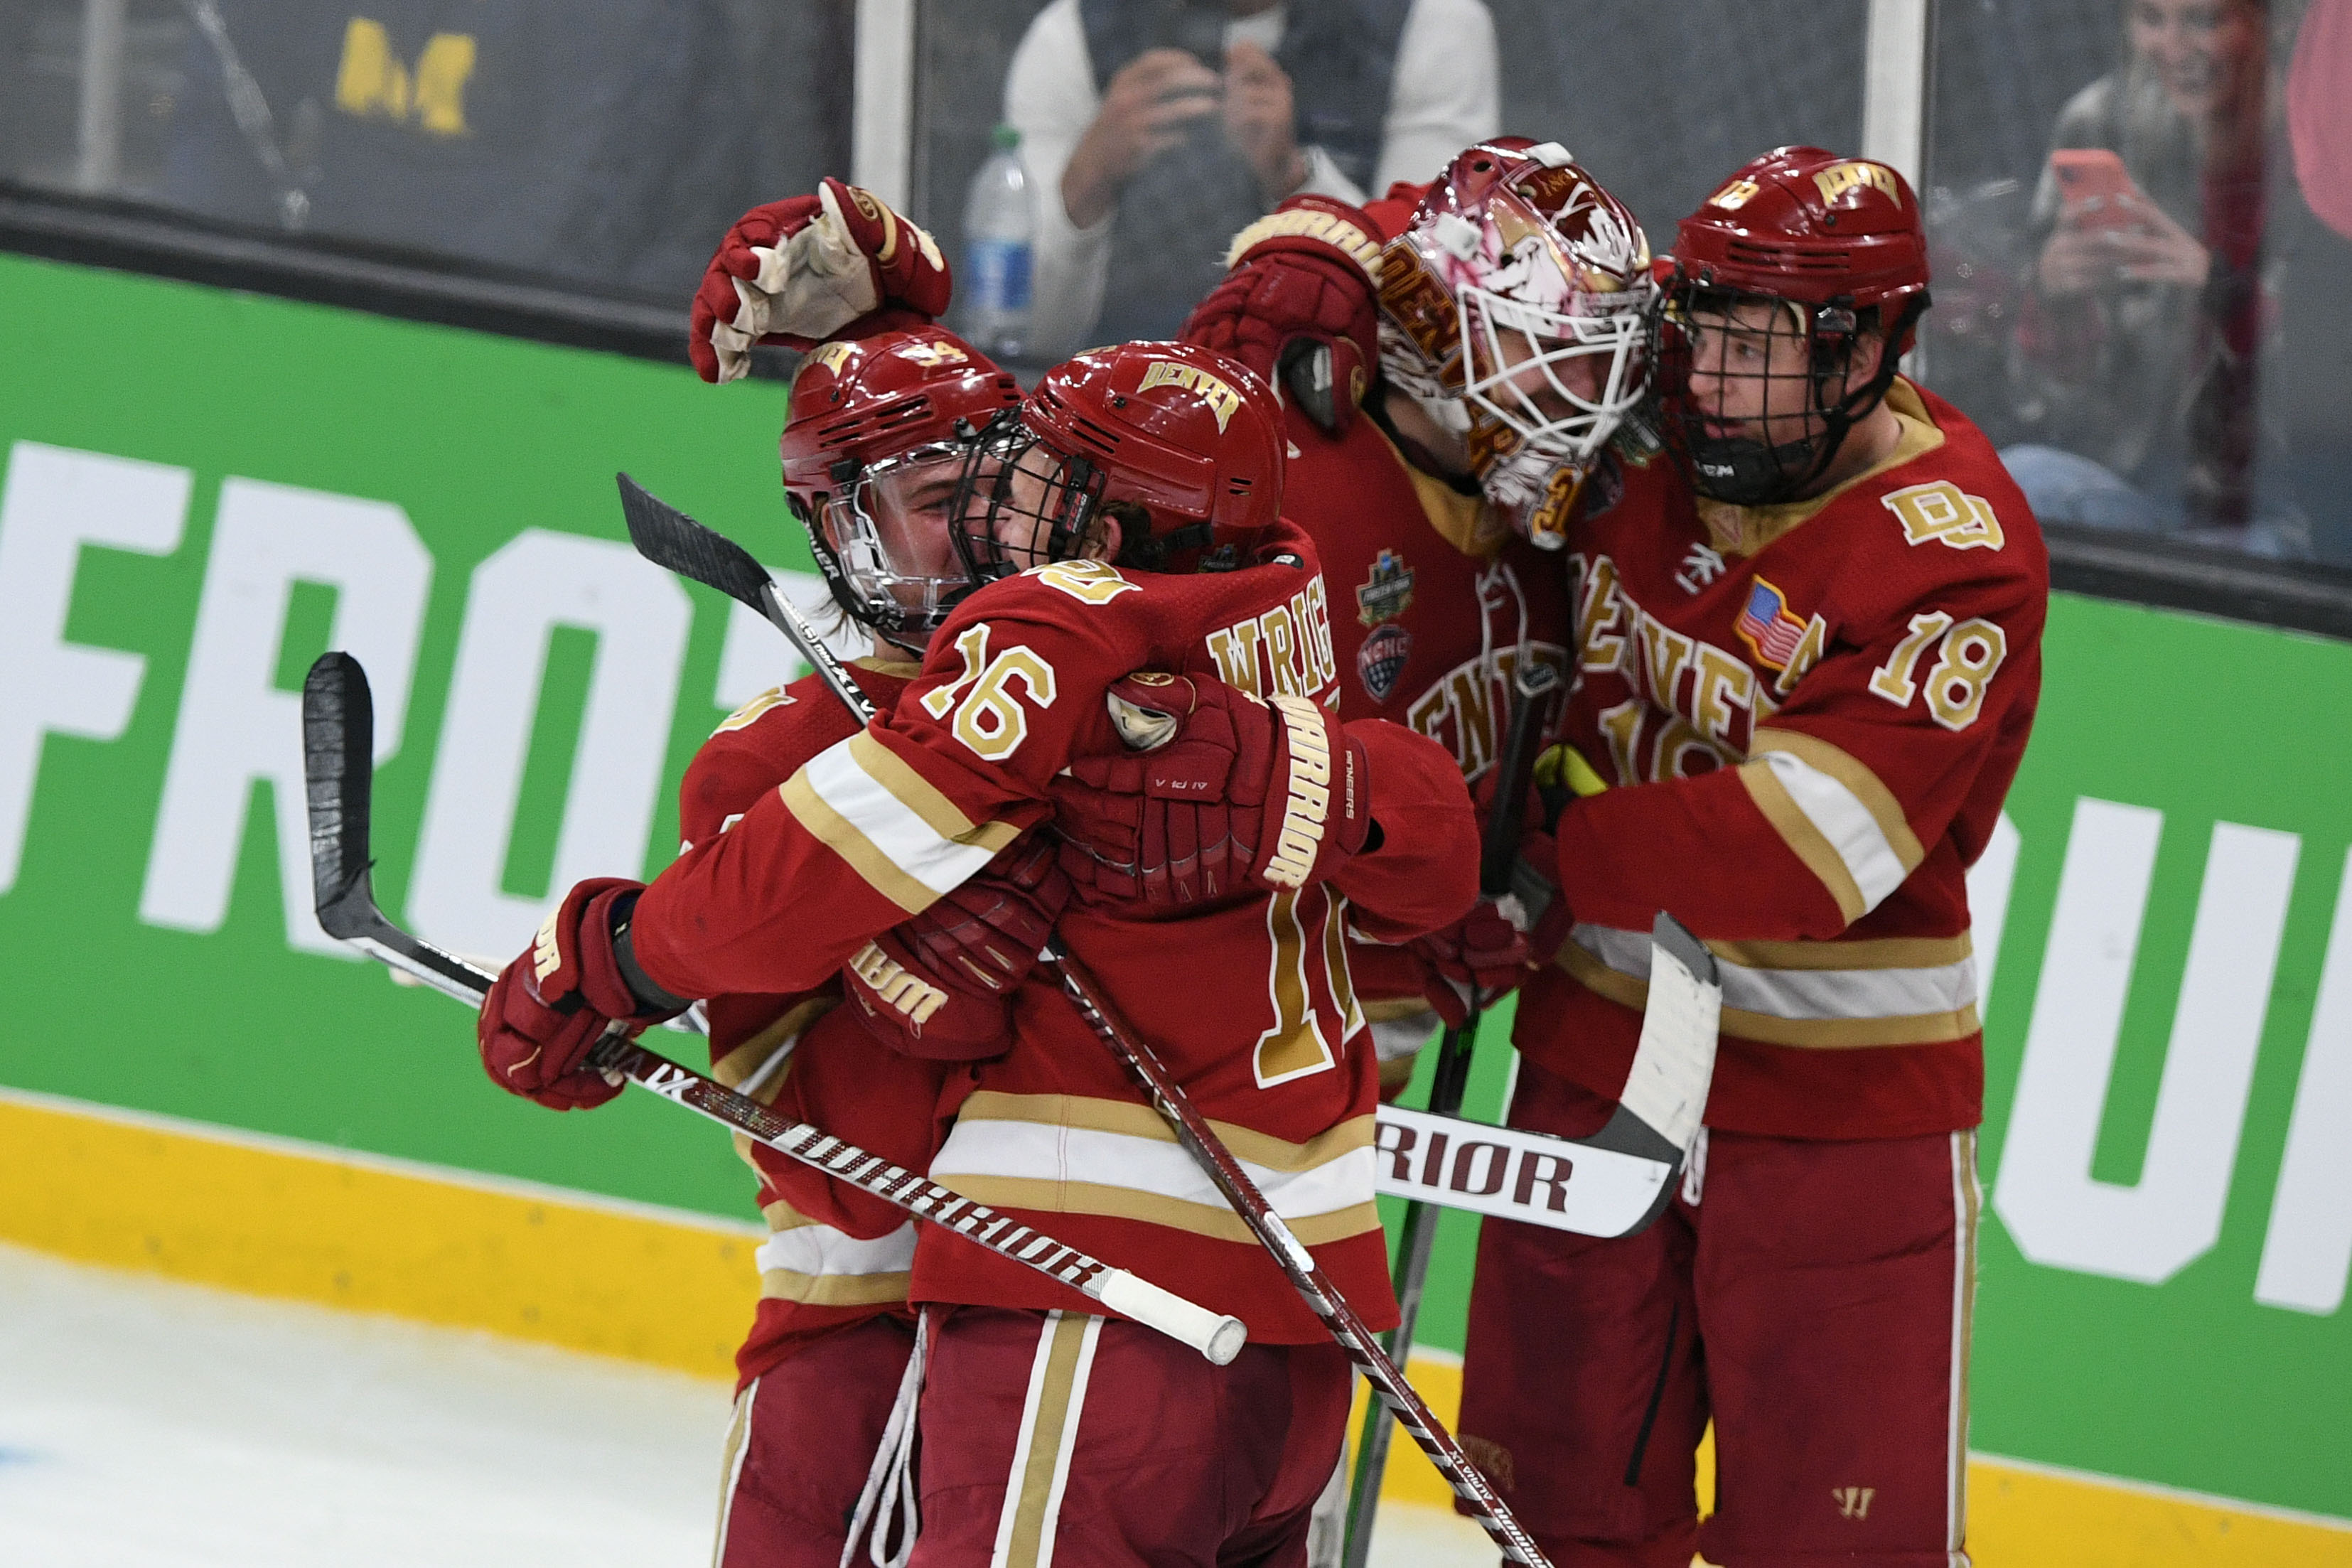 Denver Pioneers forward Bobby Brink celebrates with forward Cameron Wright after defeating Michigan Wolverines in an overtime period of the 2022 Frozen Four college ice hockey national semifinals at the TD Garden.